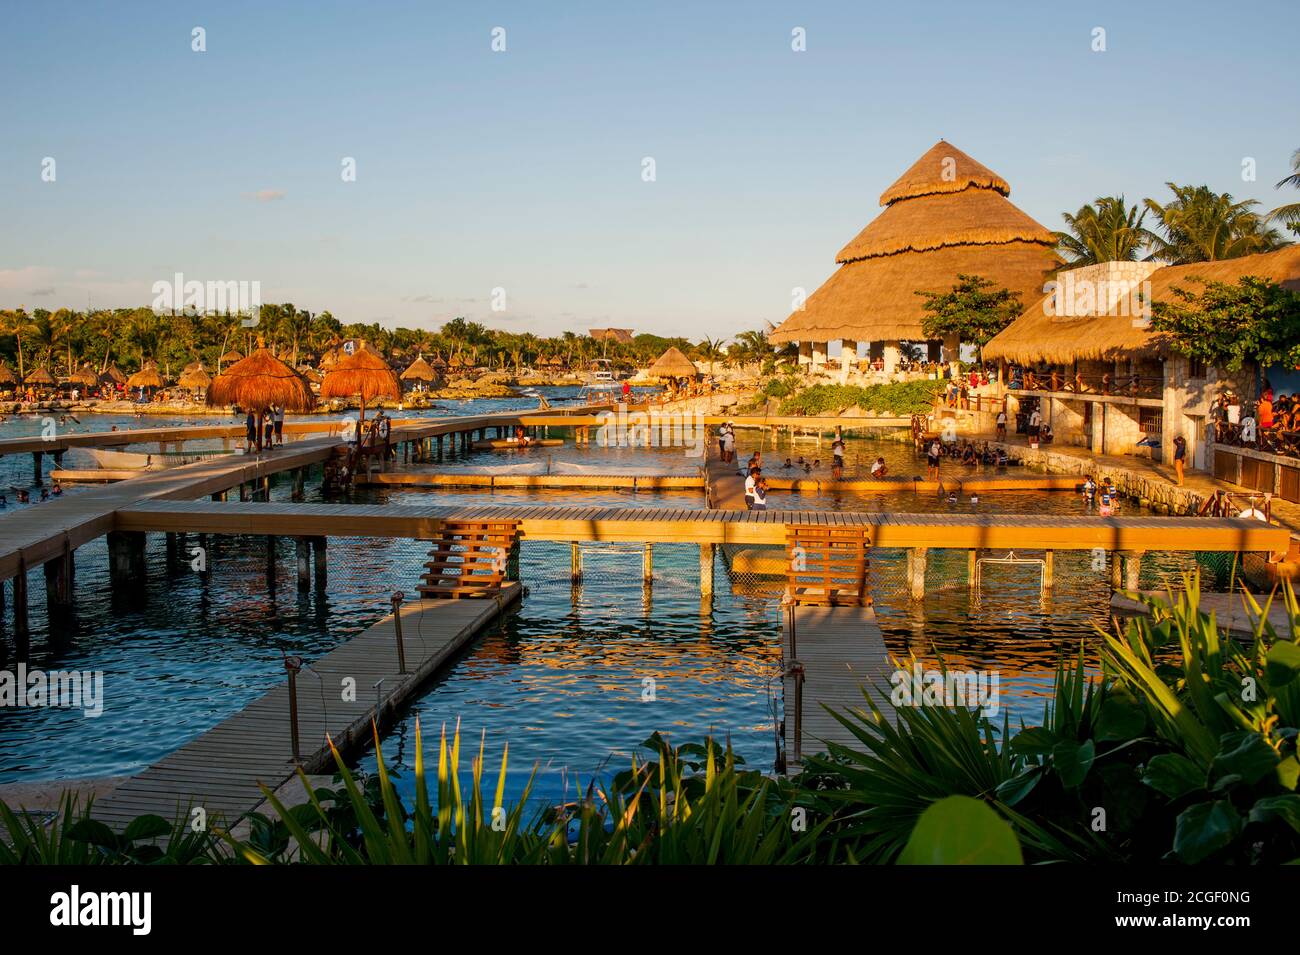 The Xcaret Eco Theme Park on the Riviera Maya near Cancun in the state of Quintana Roo, Mexico. Stock Photo